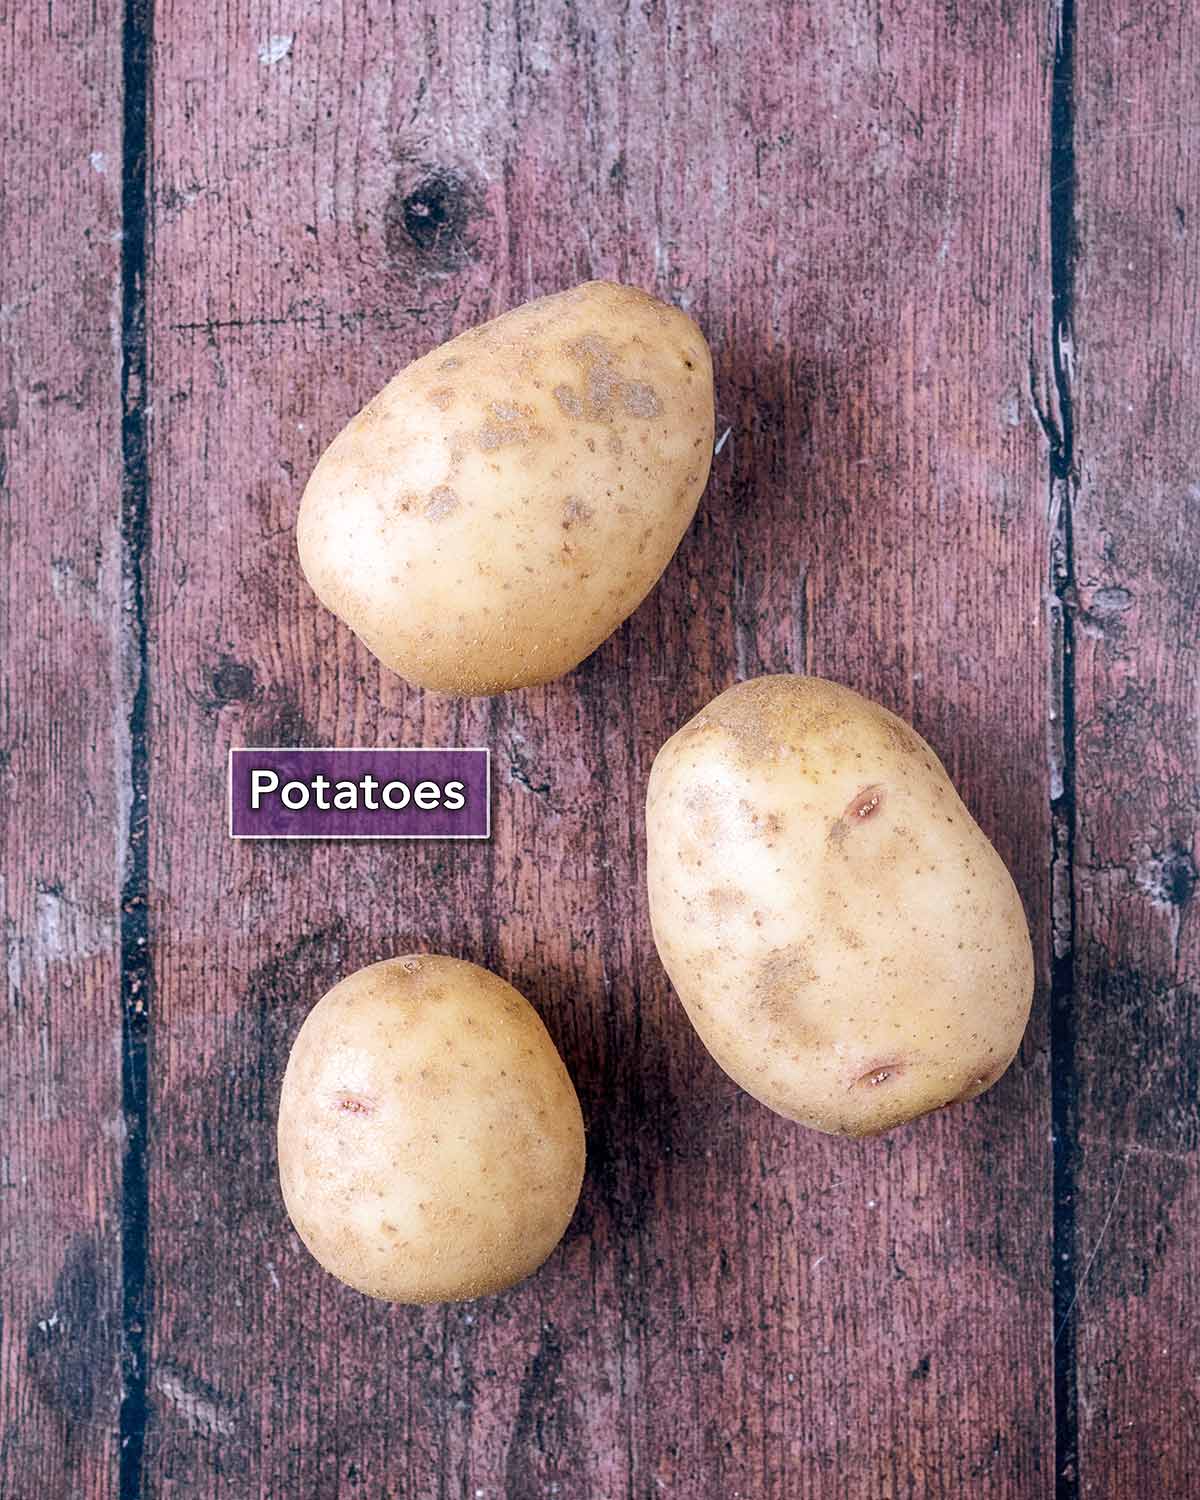 Three potatoes on a wooden surface with a text overlay label.